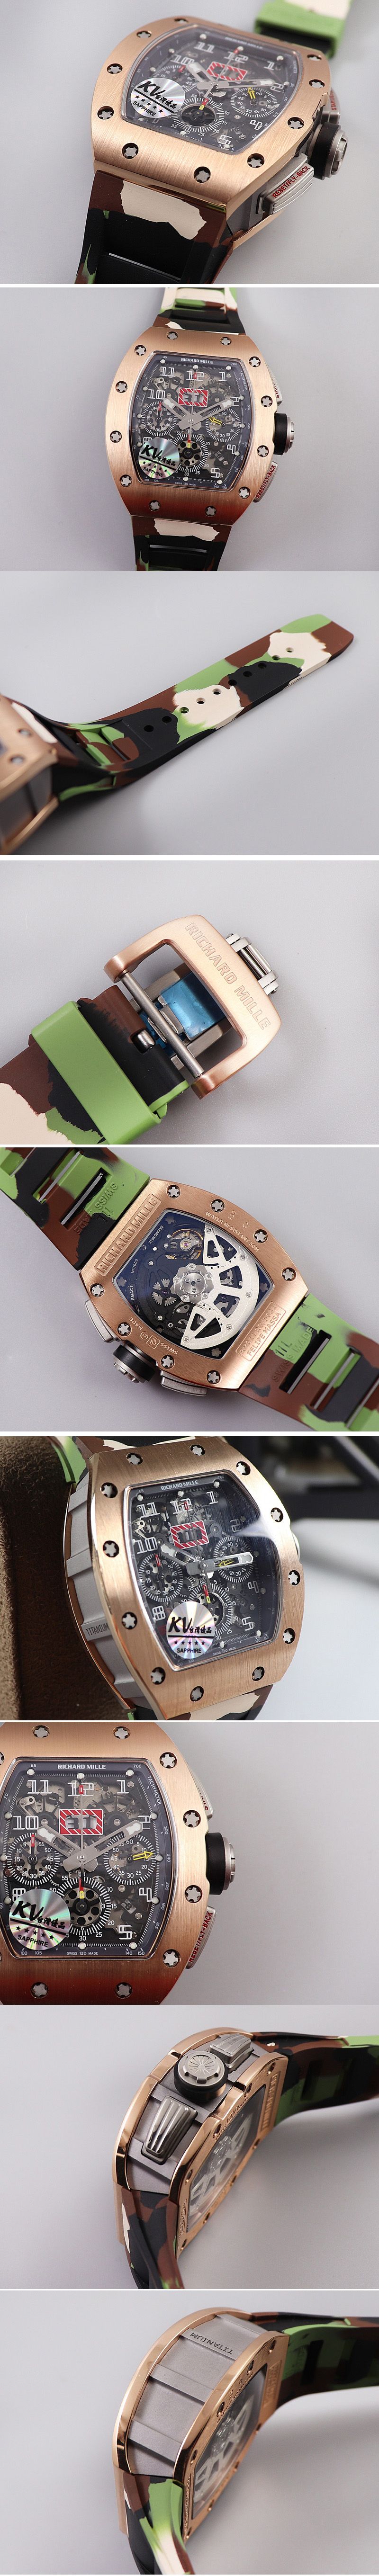 Replica Richard Mille RM011 RG Chrono KVF 1:1 Best Edition Crystal Dial Black on Green Camo Rubber Strap A7750 V3